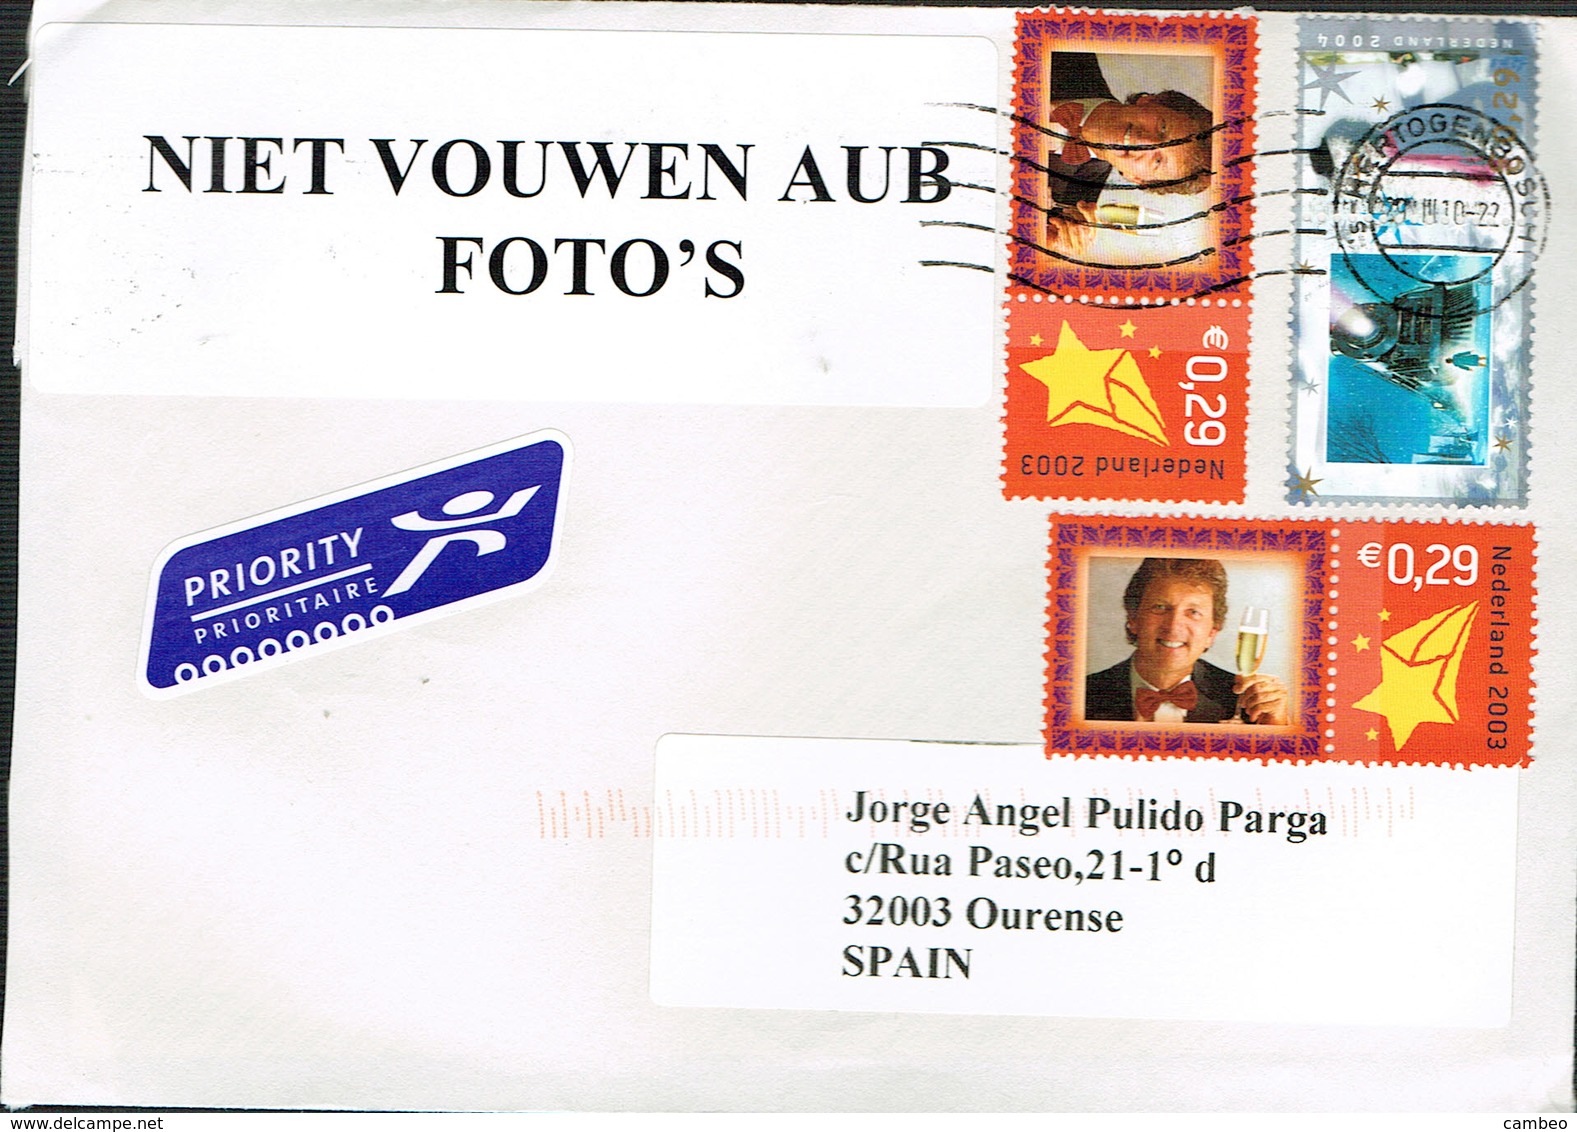 USED COVER 2010 NEDERLAND HOLAND NOEL CRISTMAS - Covers & Documents